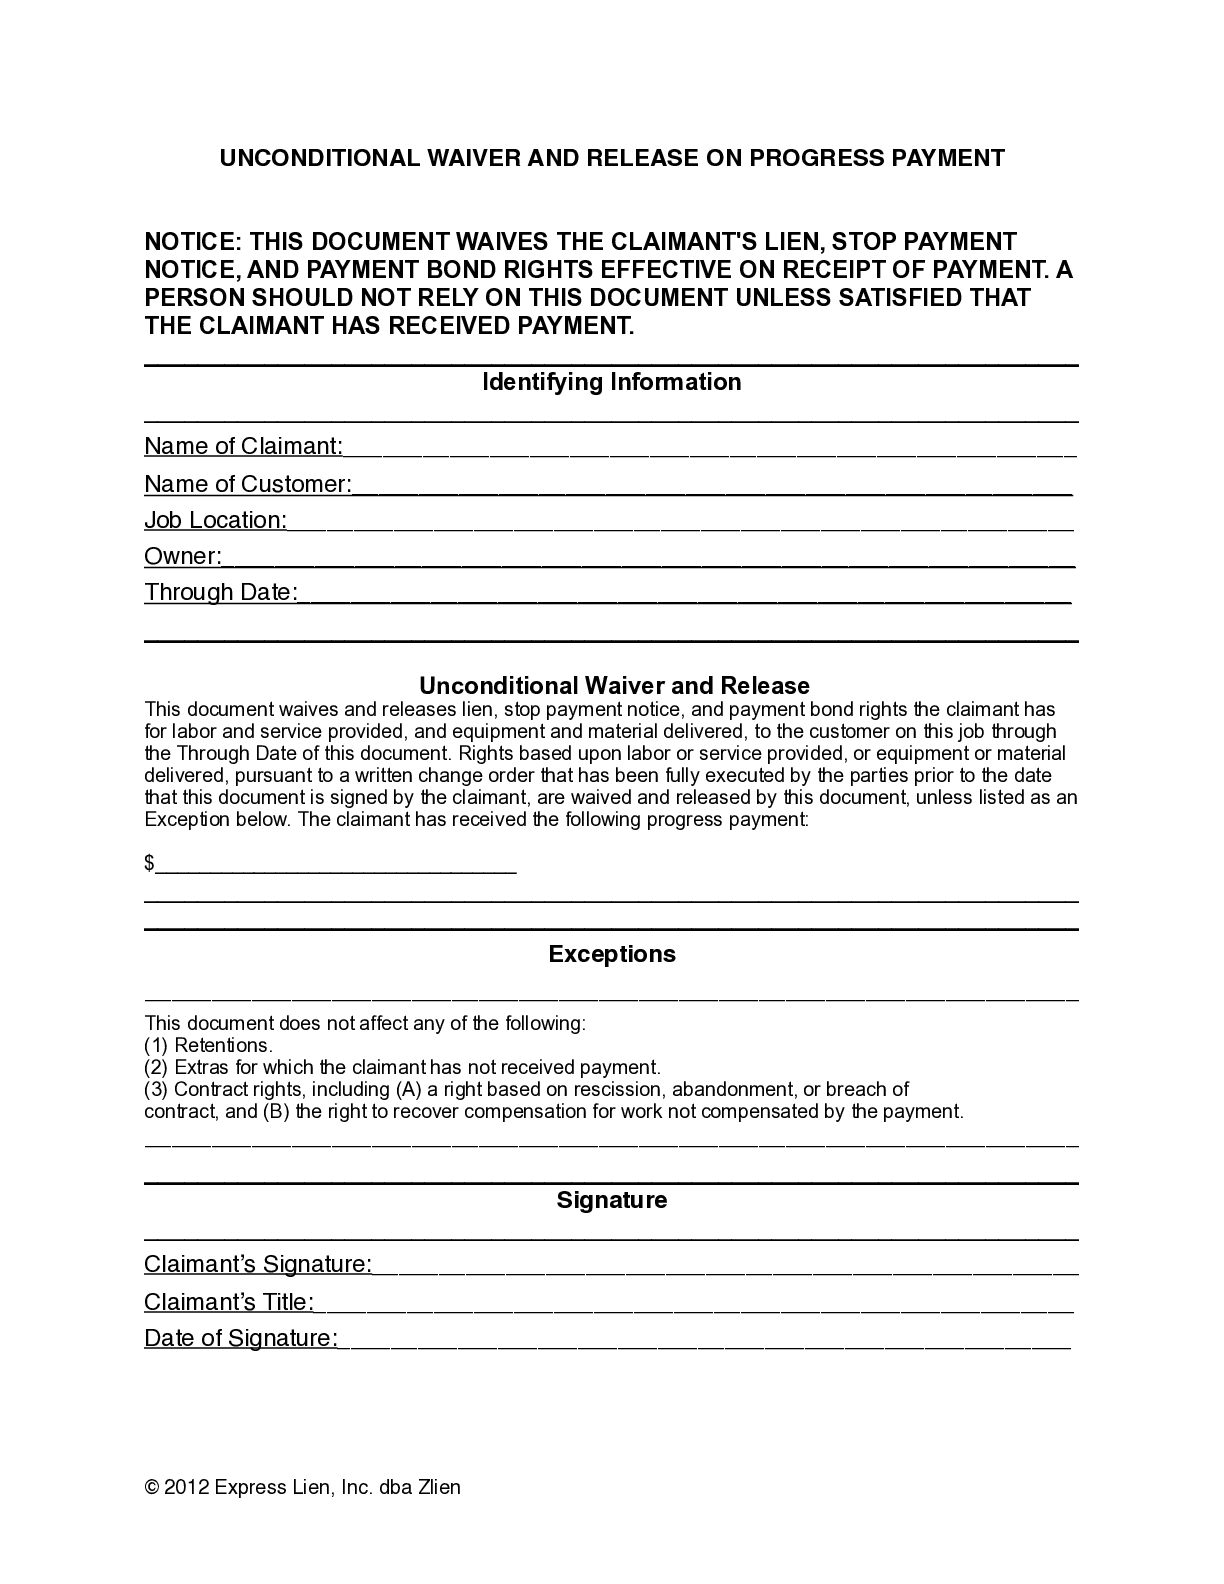 North Carolina Partial Unconditional Lien Waiver Form - free from